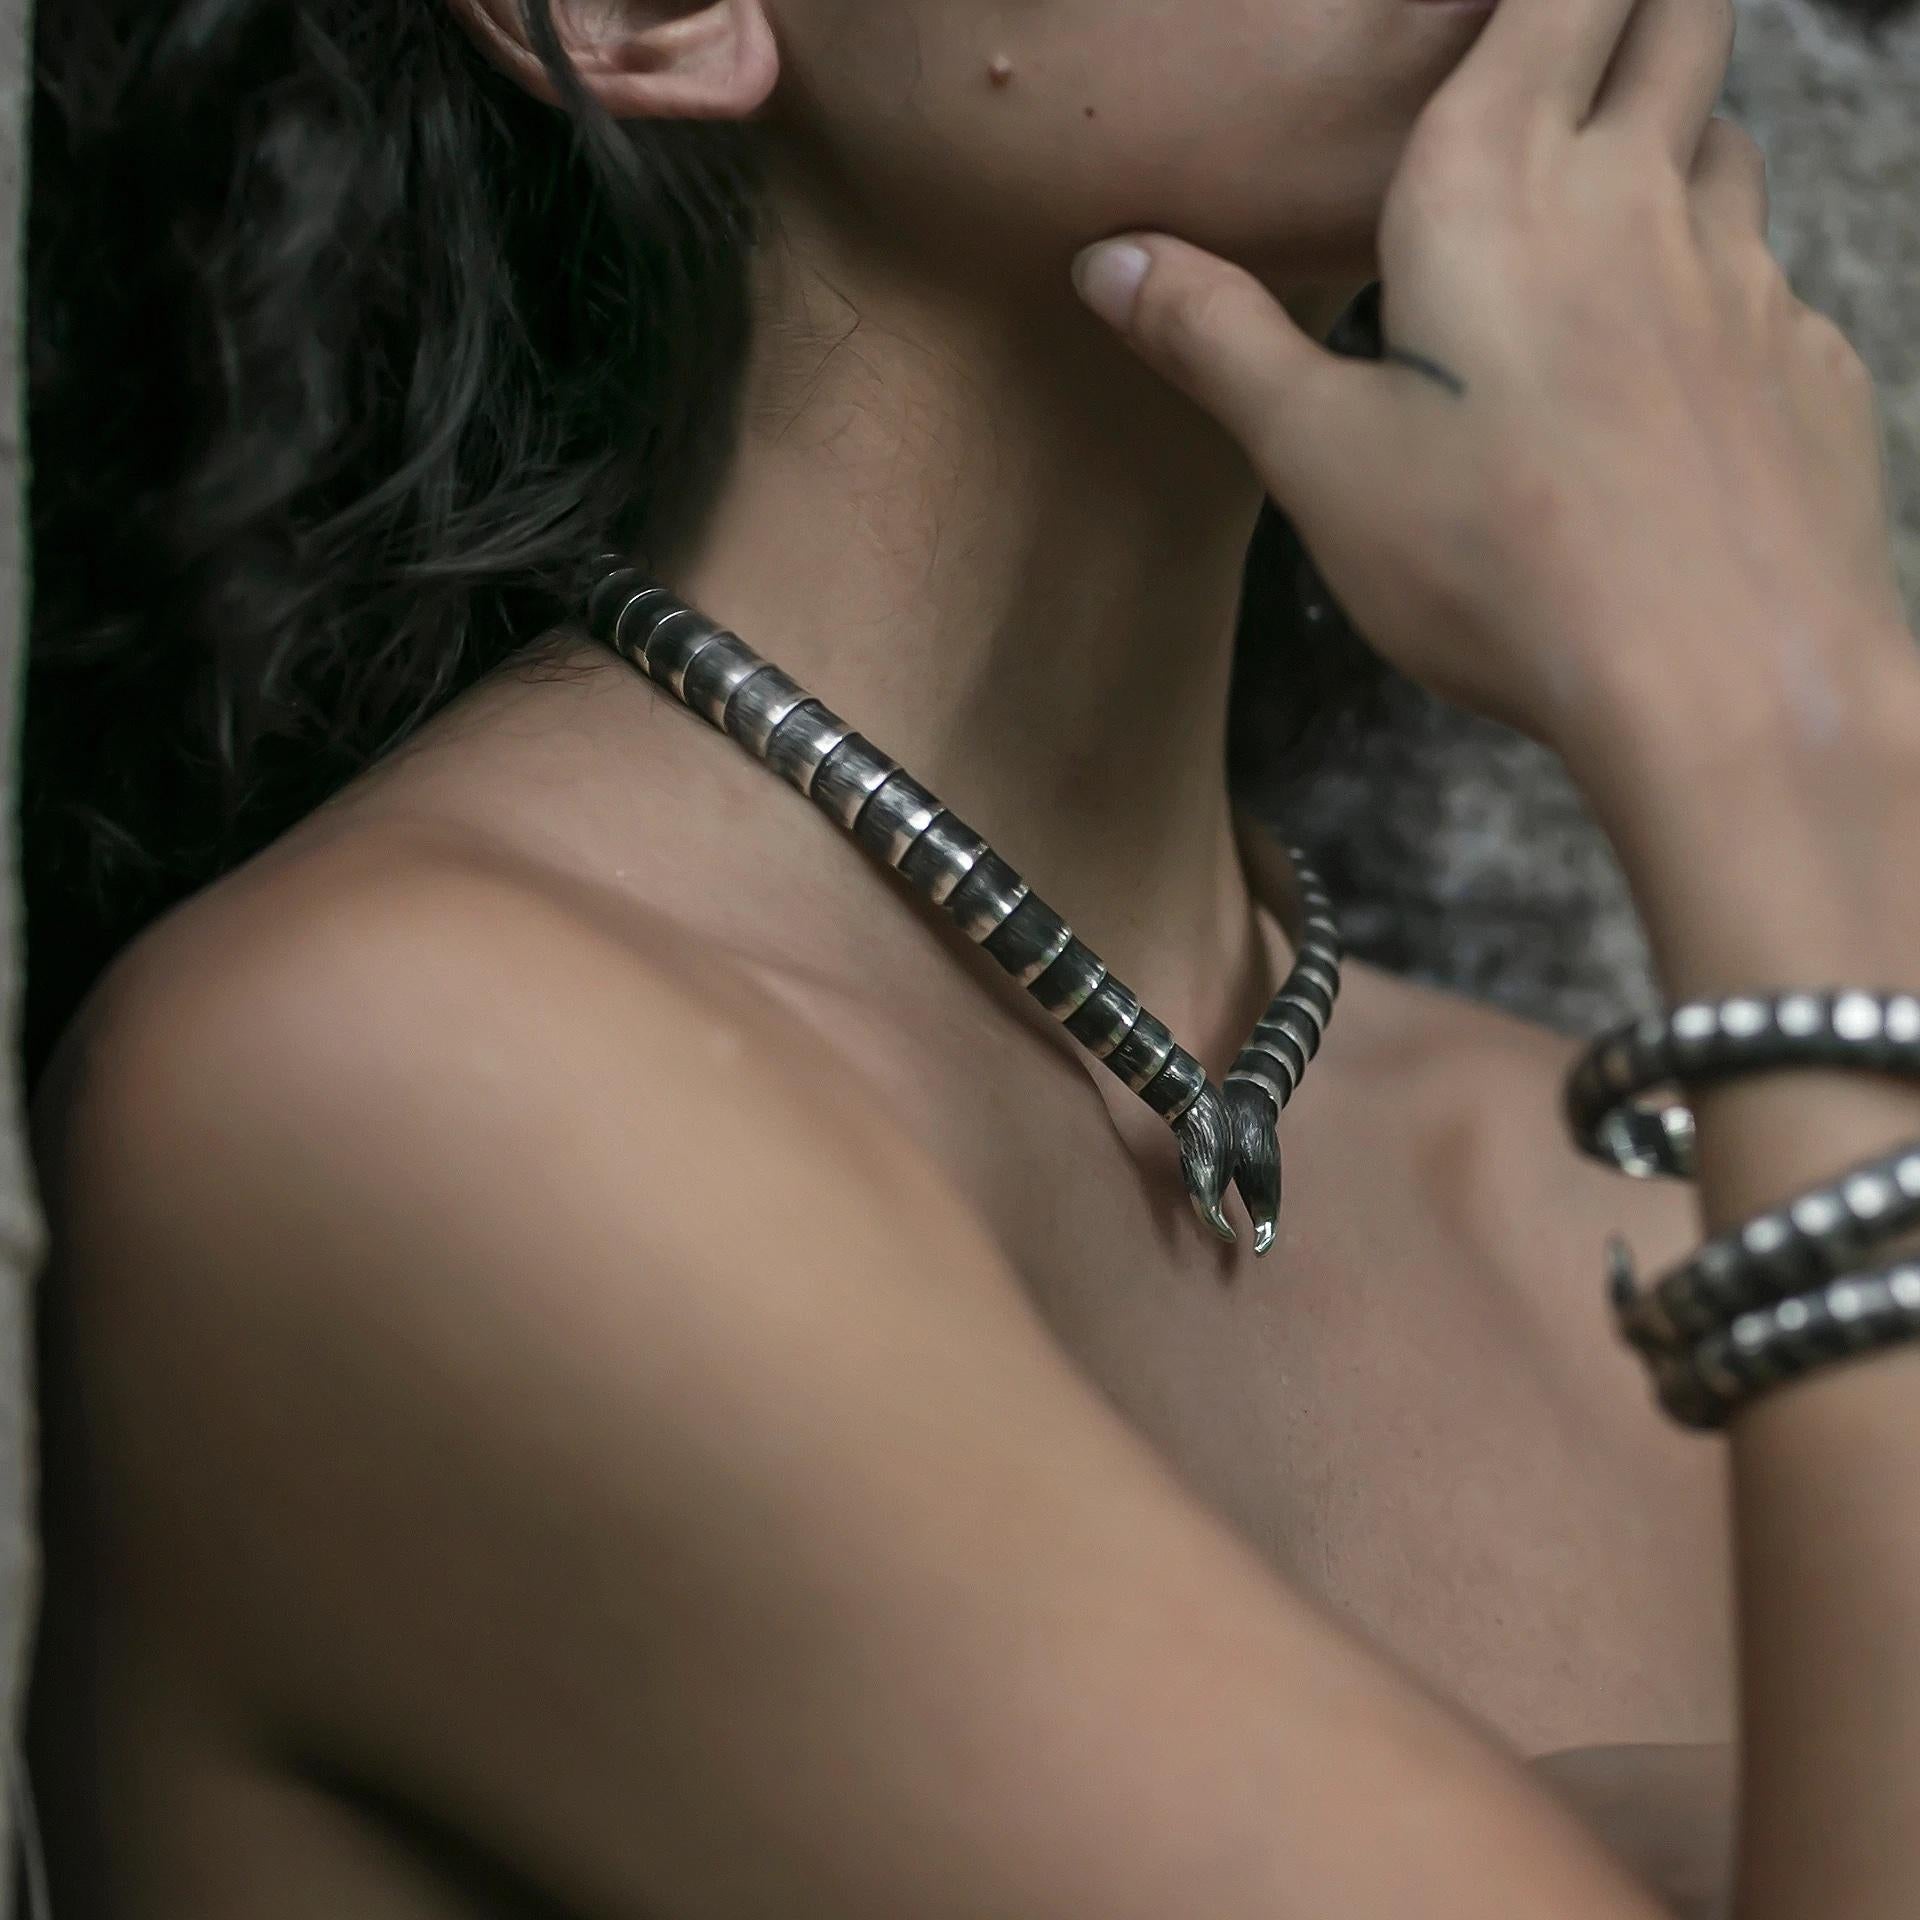 Inspired by scales found in nature this meticulously crafted collar necklace is hand-crafted in Bali by skilled silversmiths. Each scale is individually crafted and layered to form a stunning piece of jewellery. The collar is hinged, curved and